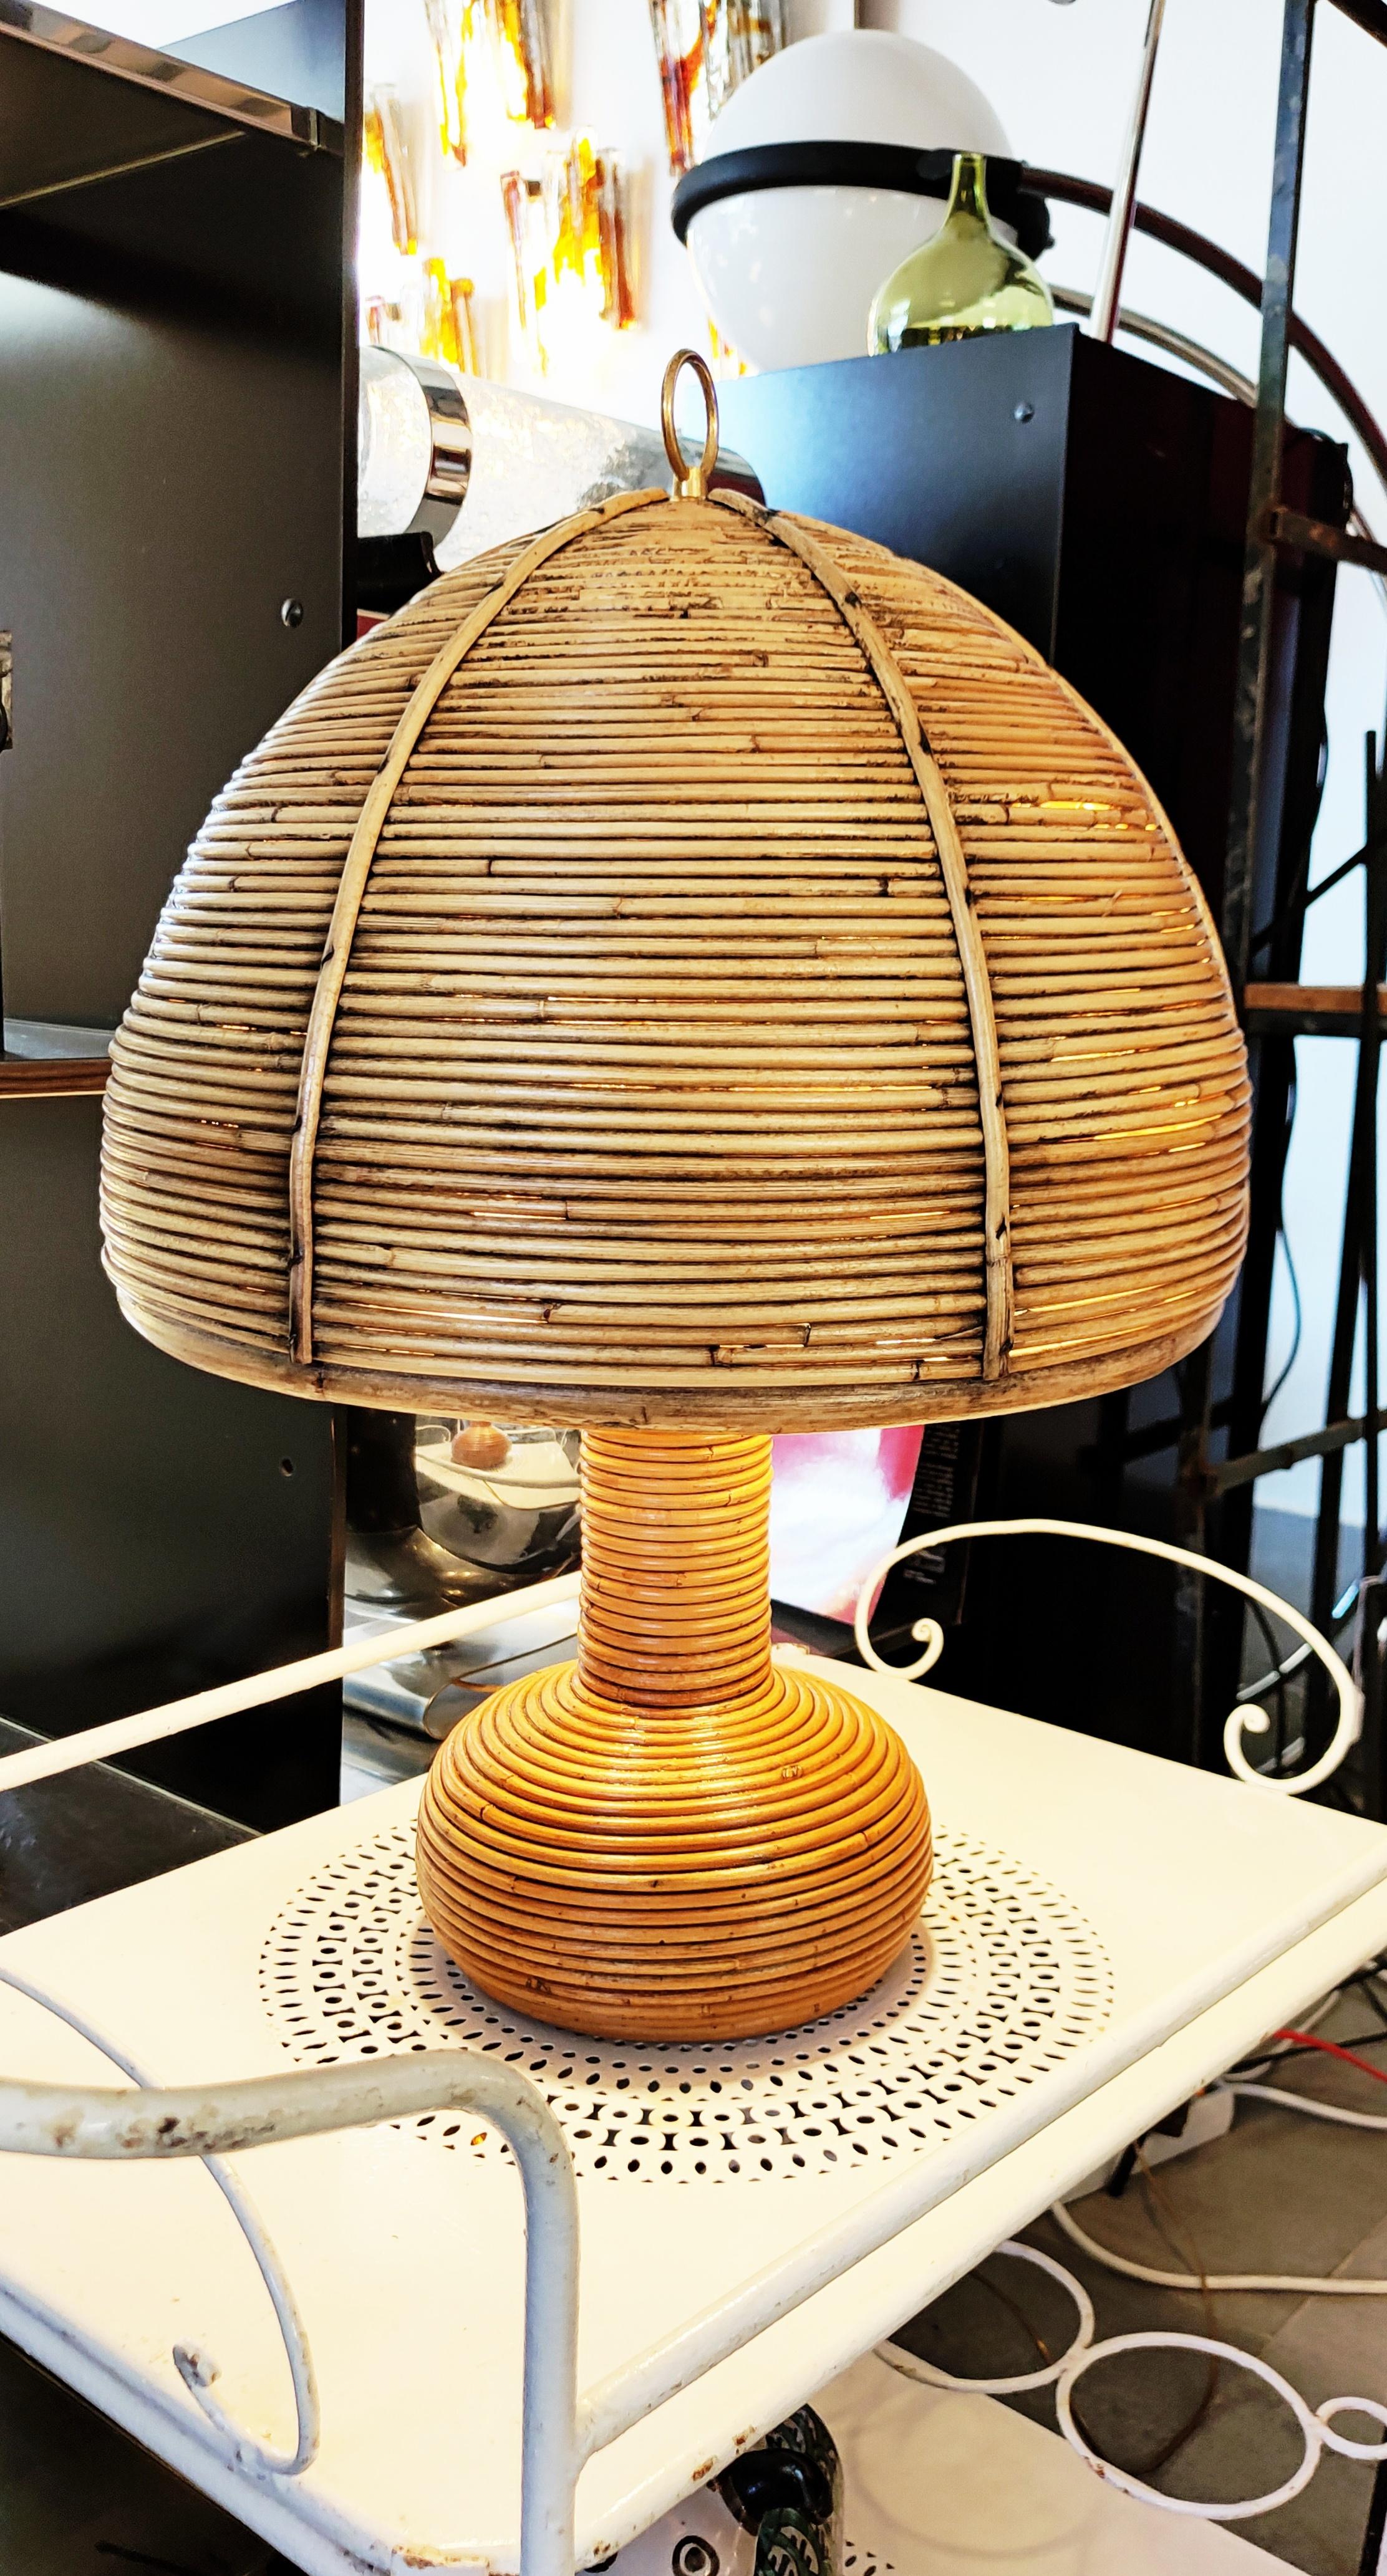 Rare large rattan and bamboo table lamp manufactured in 1970s in Italy.
In perfect vintage condition. The whole structure of the assembly of the lamp is in brass, very good quality and very beautiful realization for this lamp from the 1970s.